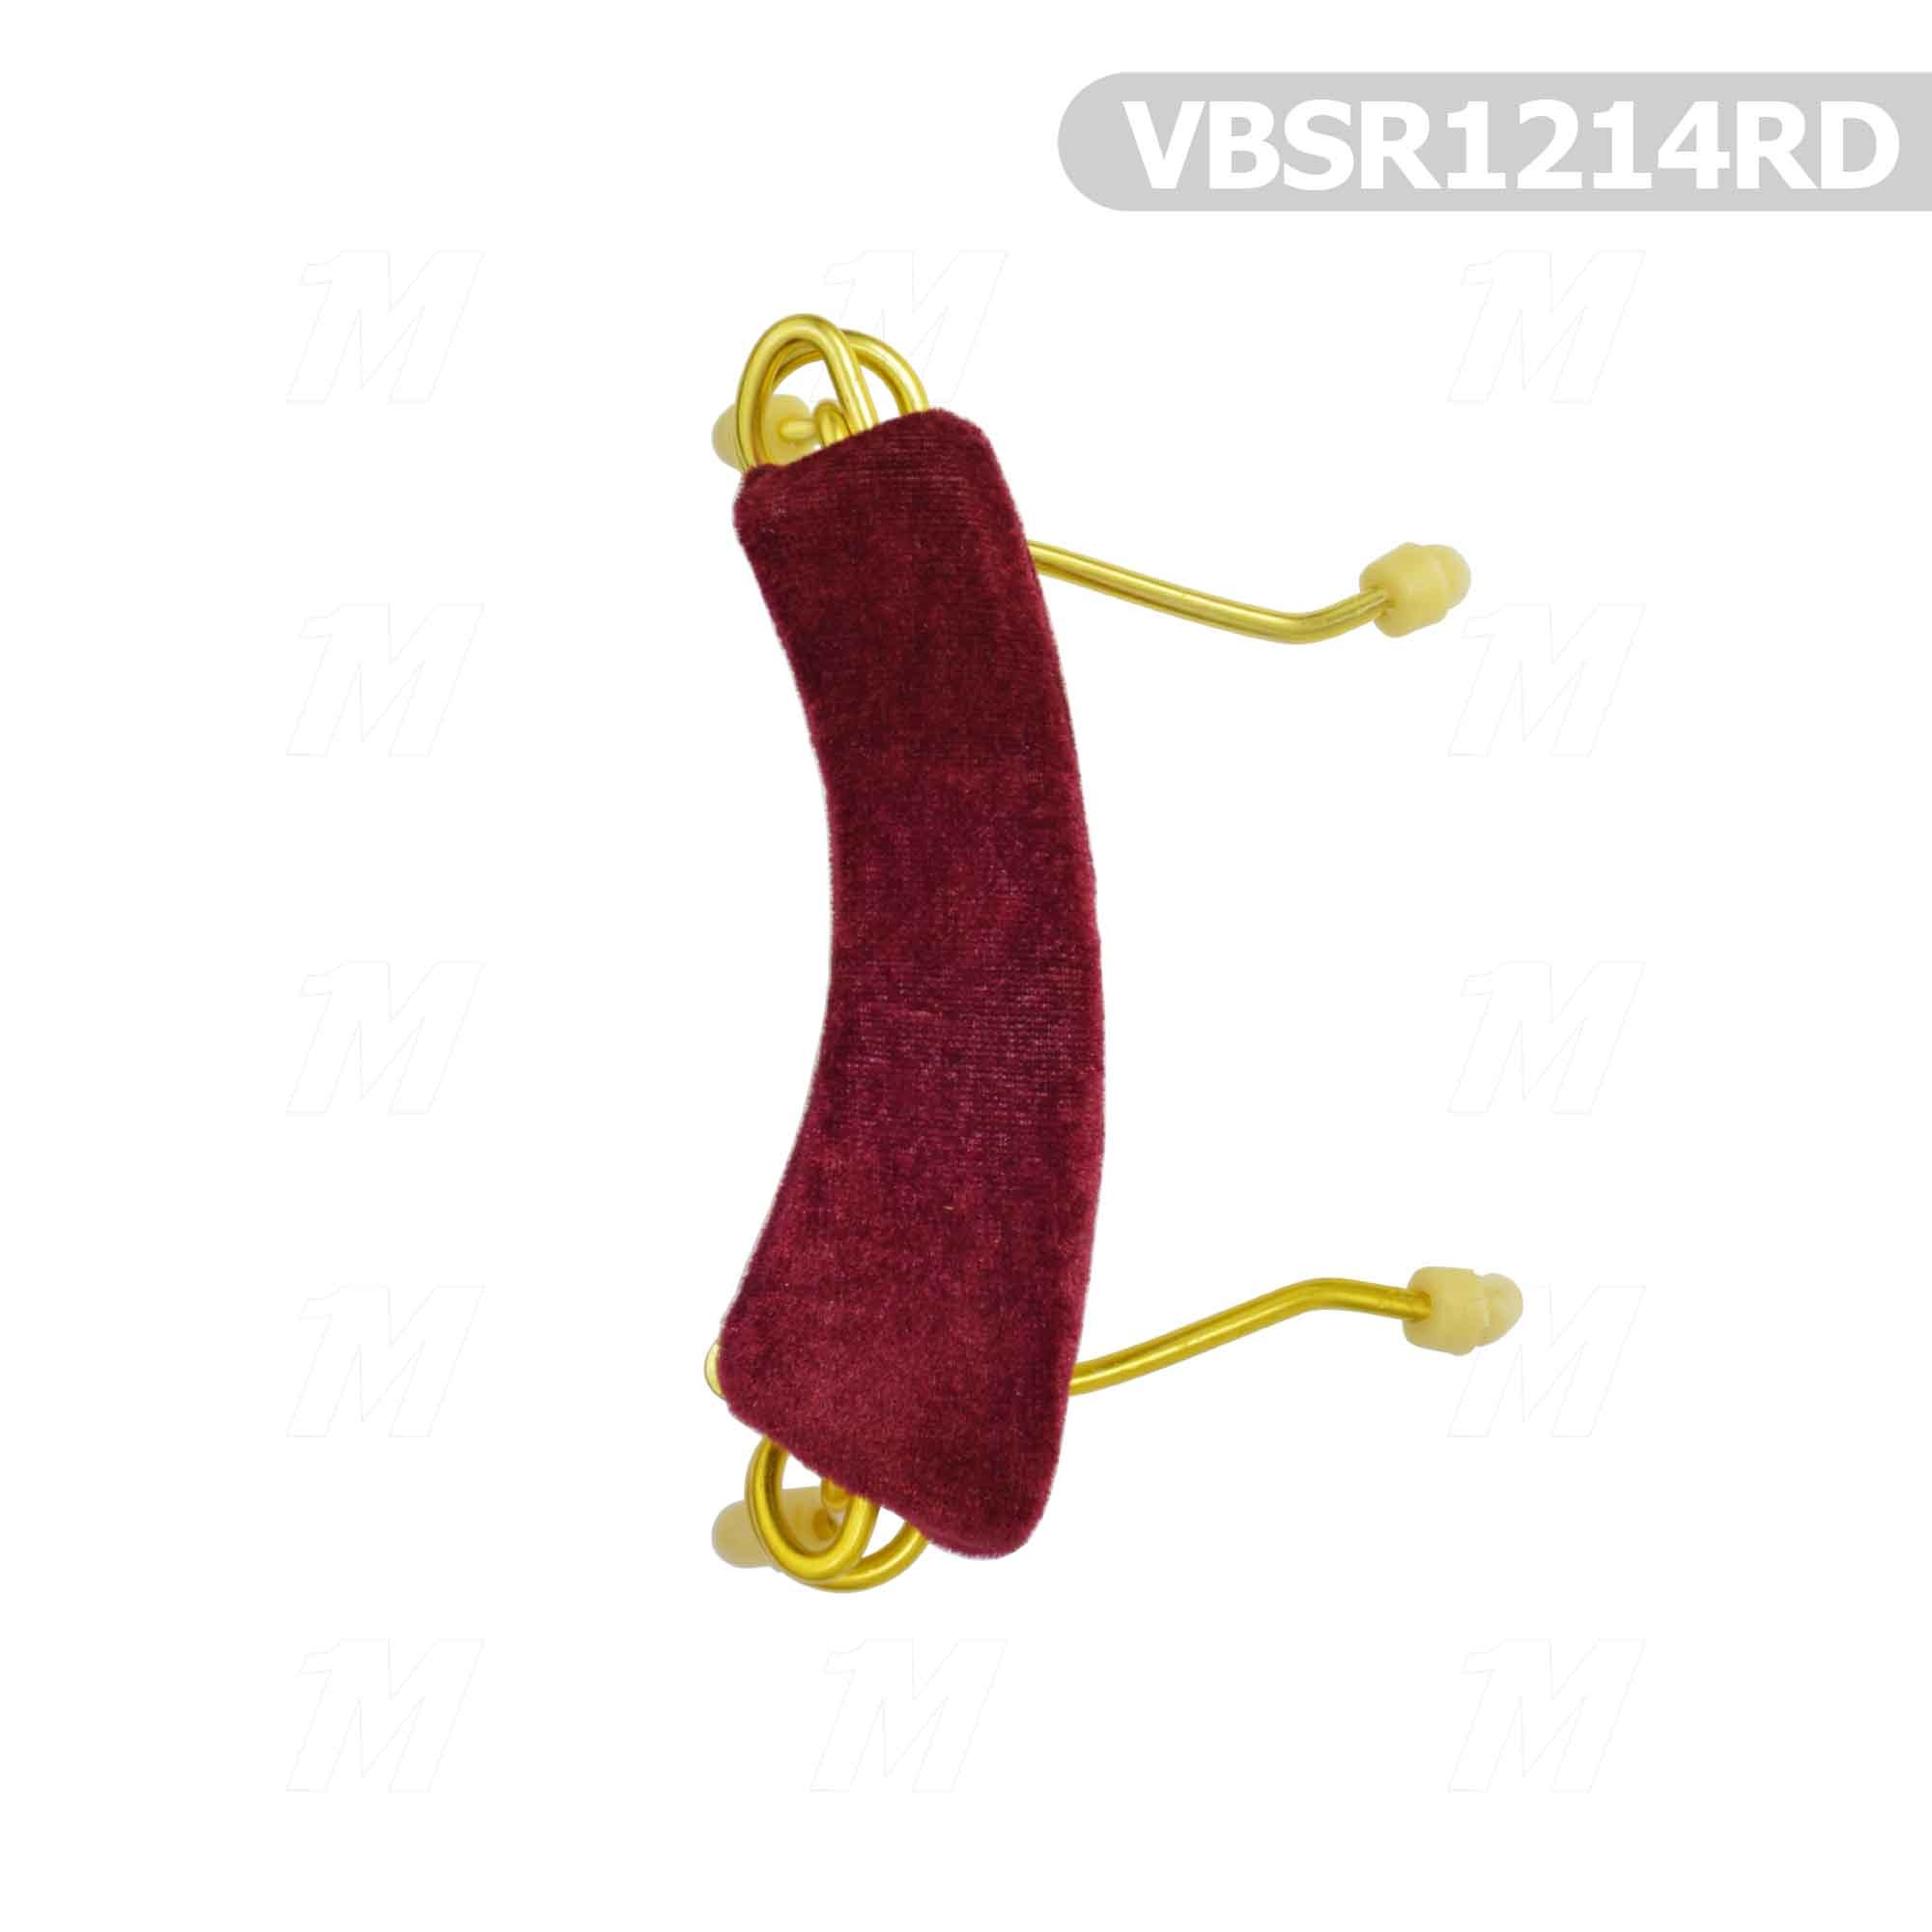 VIOLIN CUSHİON RED METAL 1/2 and 1/4 VBSR1214RD